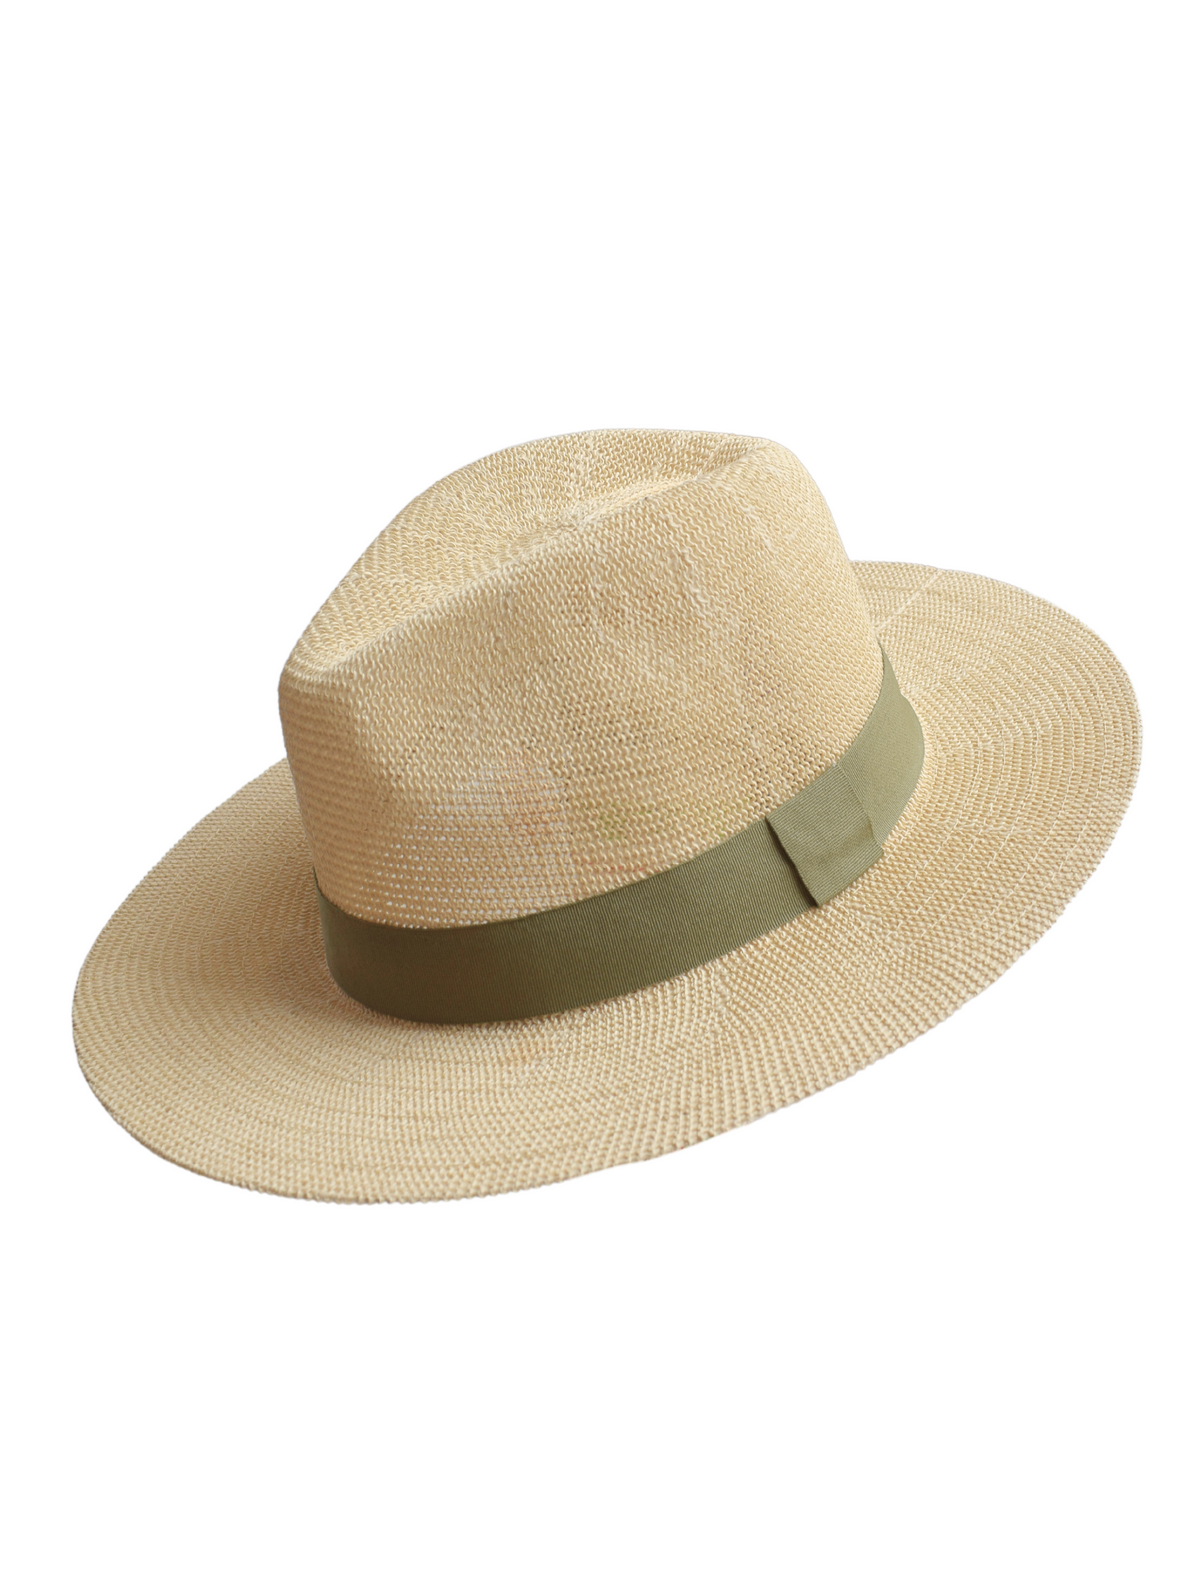 Adjustable paper panama hat with a dove coloured green trim